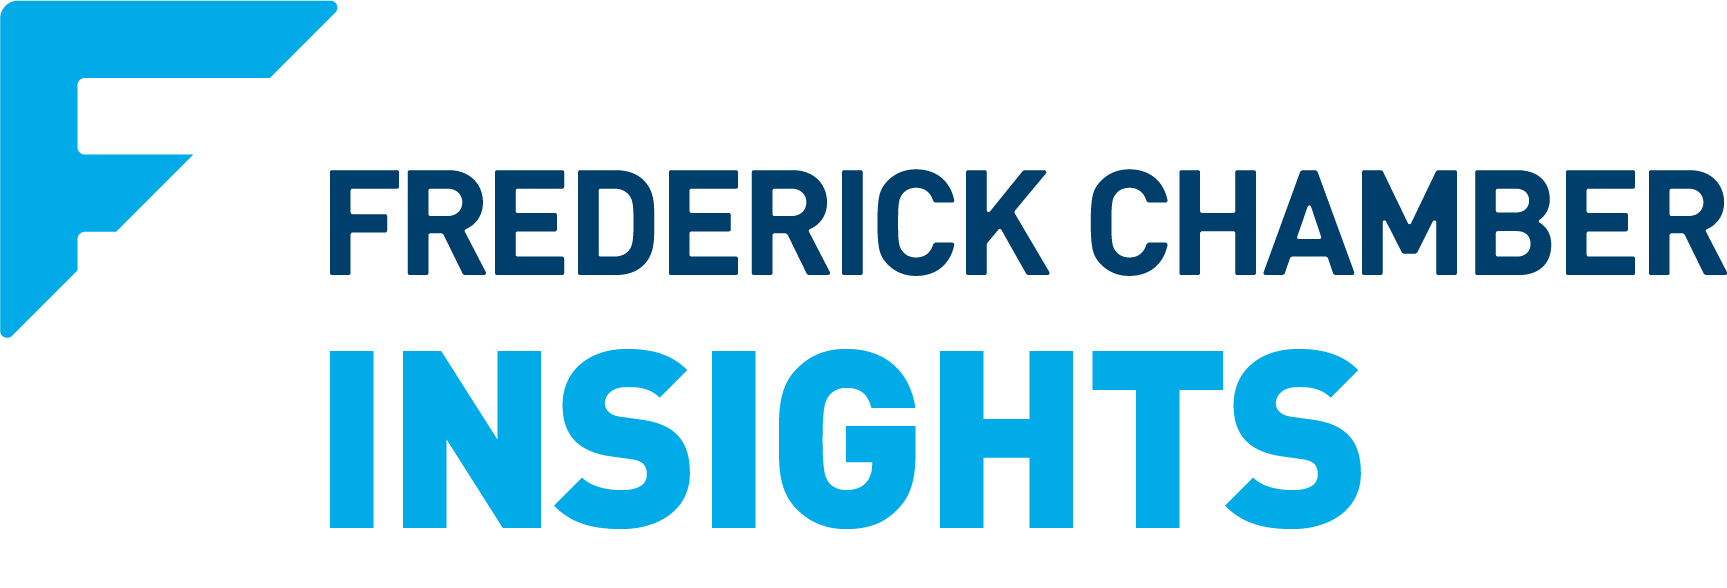 Frederick Chamber Insights